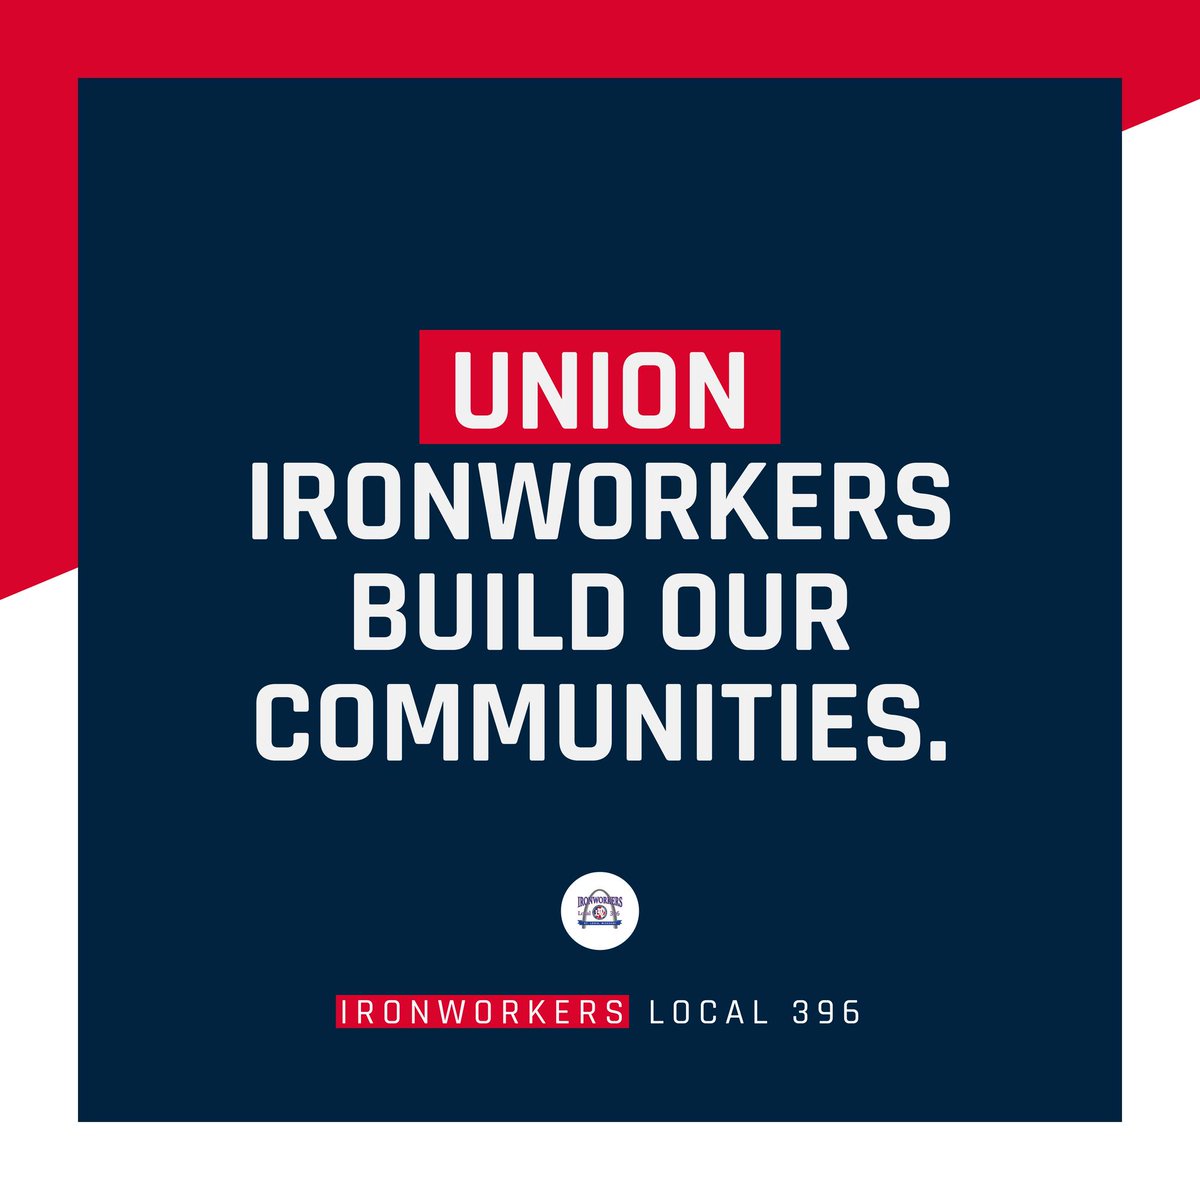 Union ironworkers build our communities! #UnionStrong ##Union #1U